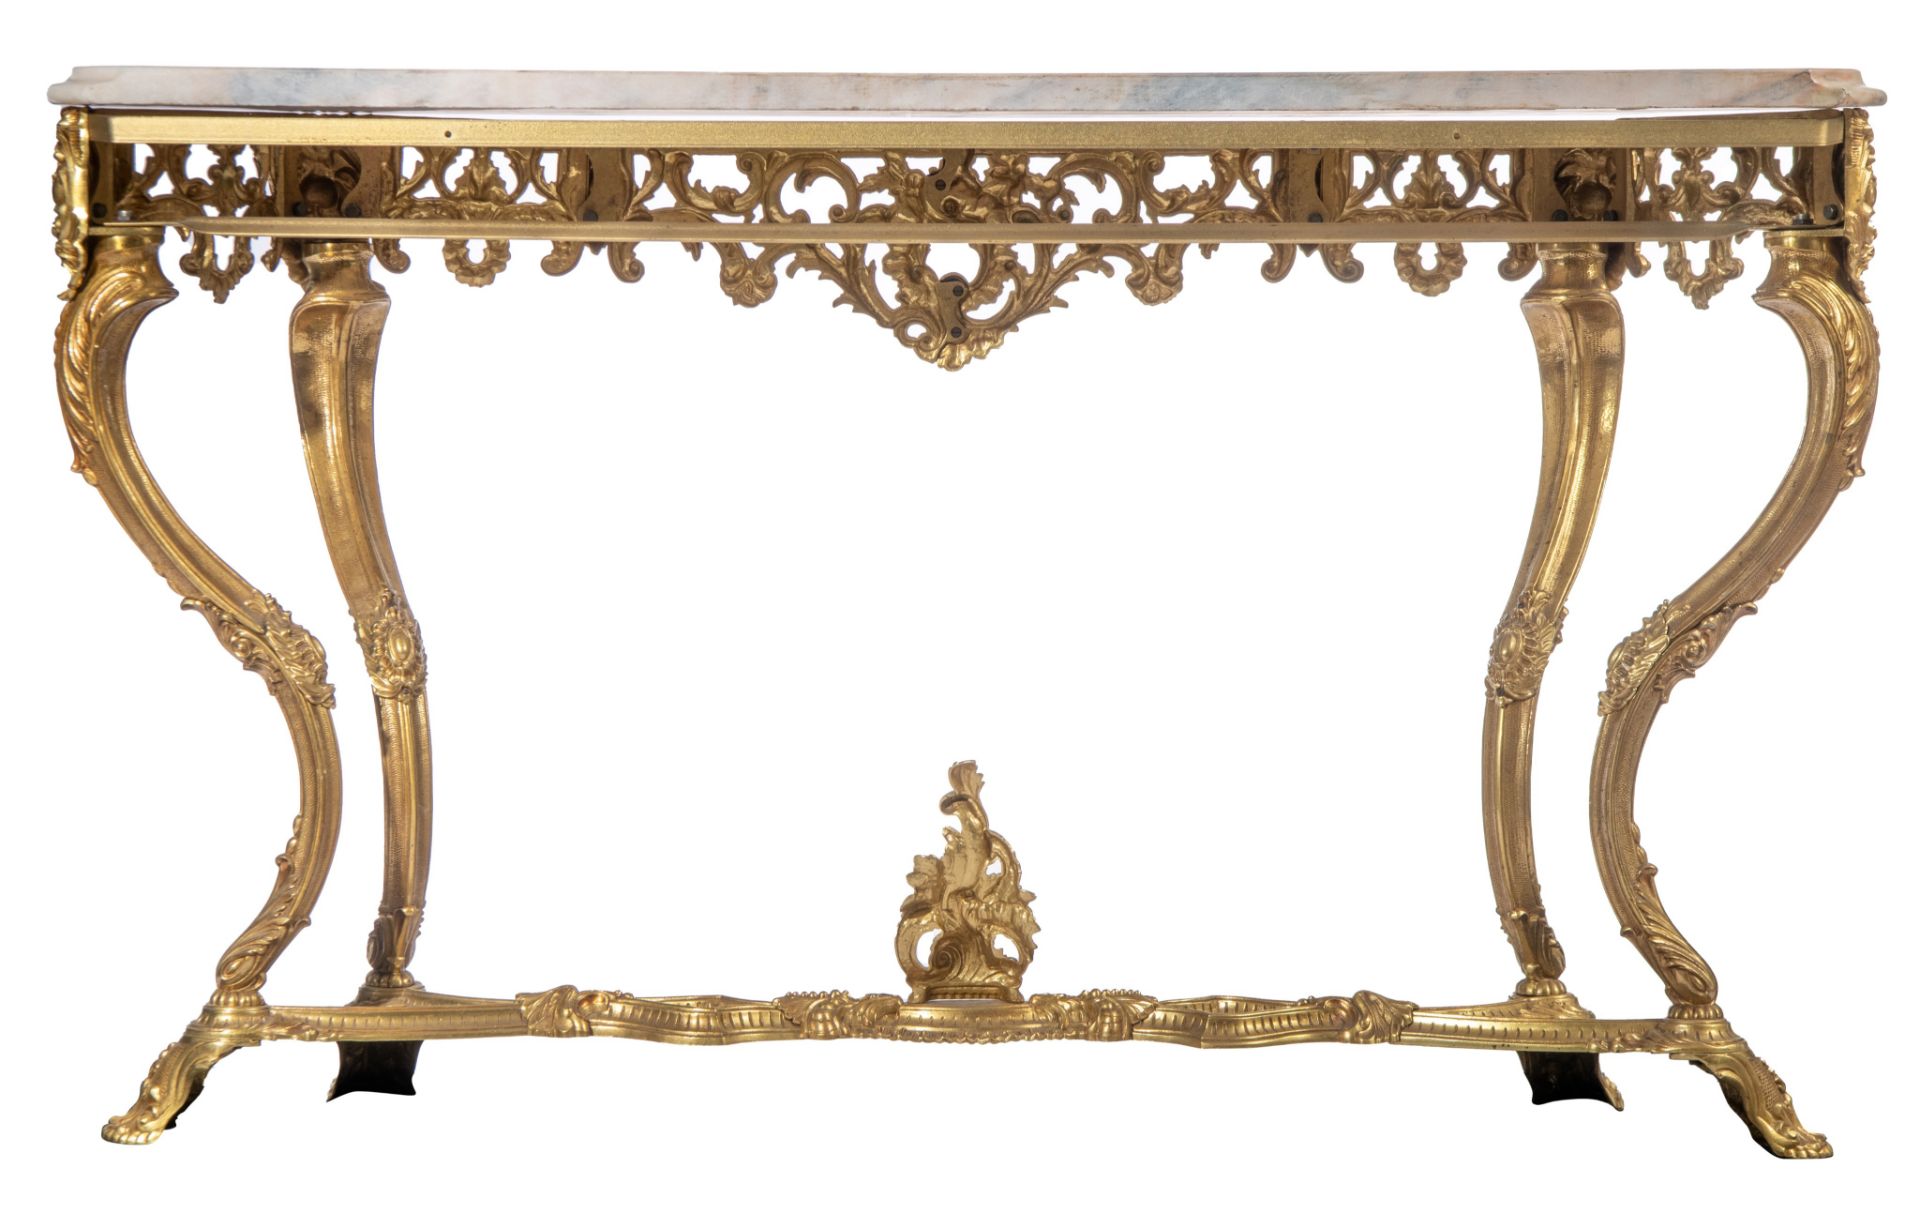 A large Rococo style gilt metal console table and mirror, H 125 - W 110 cm (the mirror) - H 85 - W 1 - Image 5 of 12